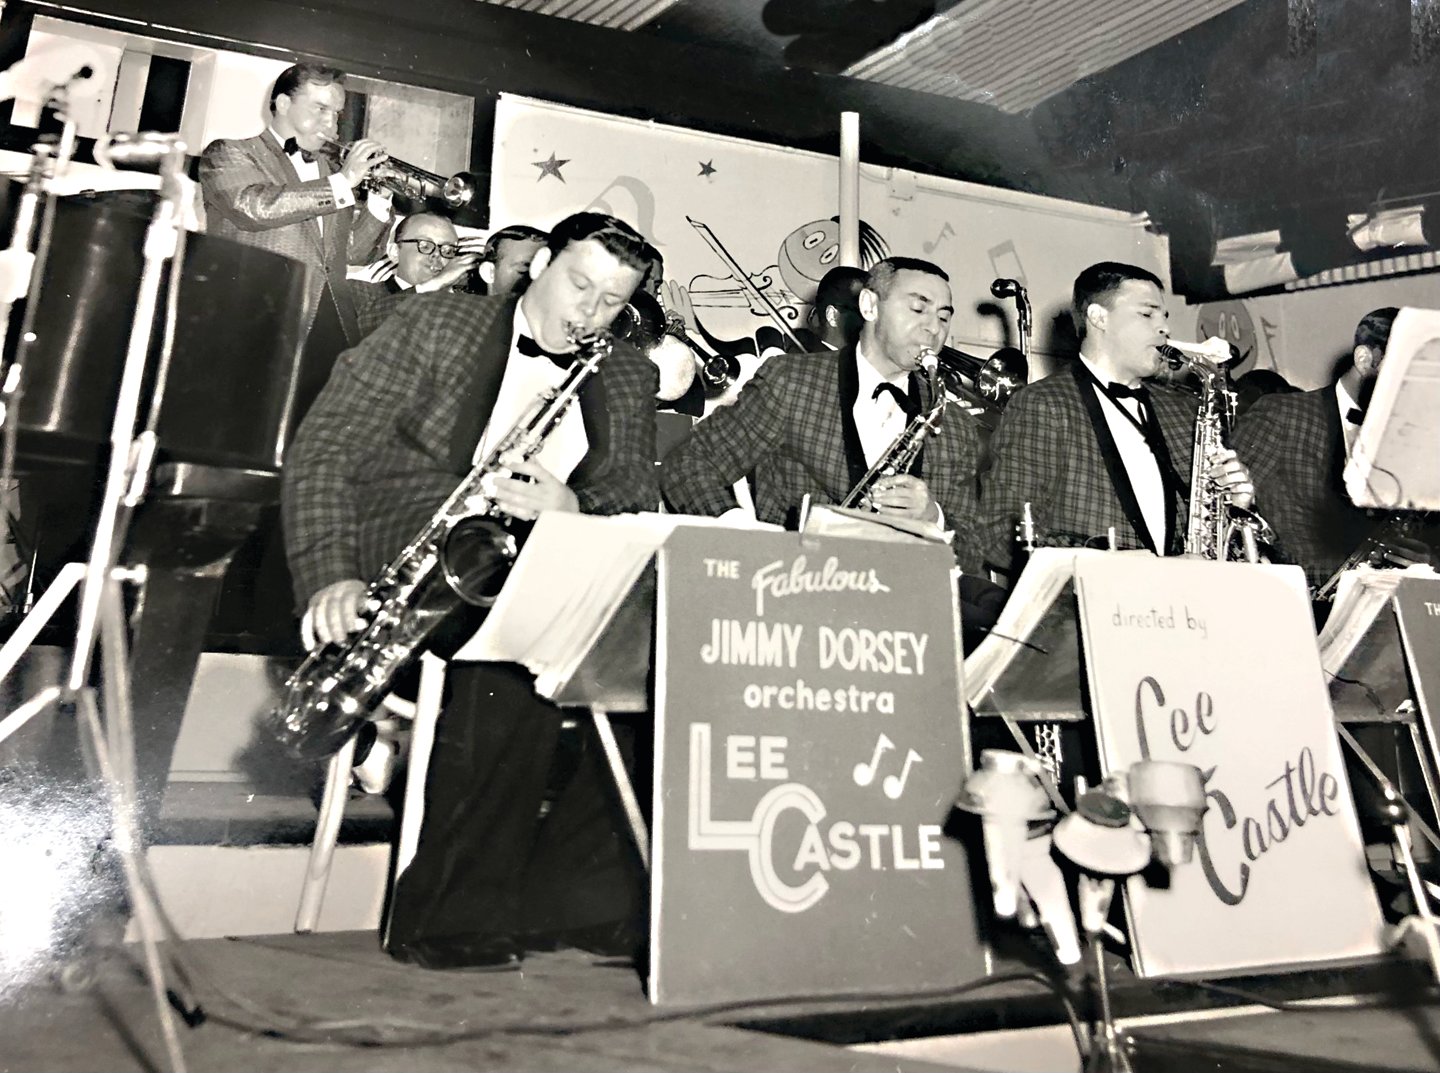 Far right on saxophone, Lentz performing with the Jimmy Dorsey Band at Freedomland Amusement Park in the Bronx in 1963. Performers included Nancy Sinatra, Donald O’Connor and Tommy Sands.